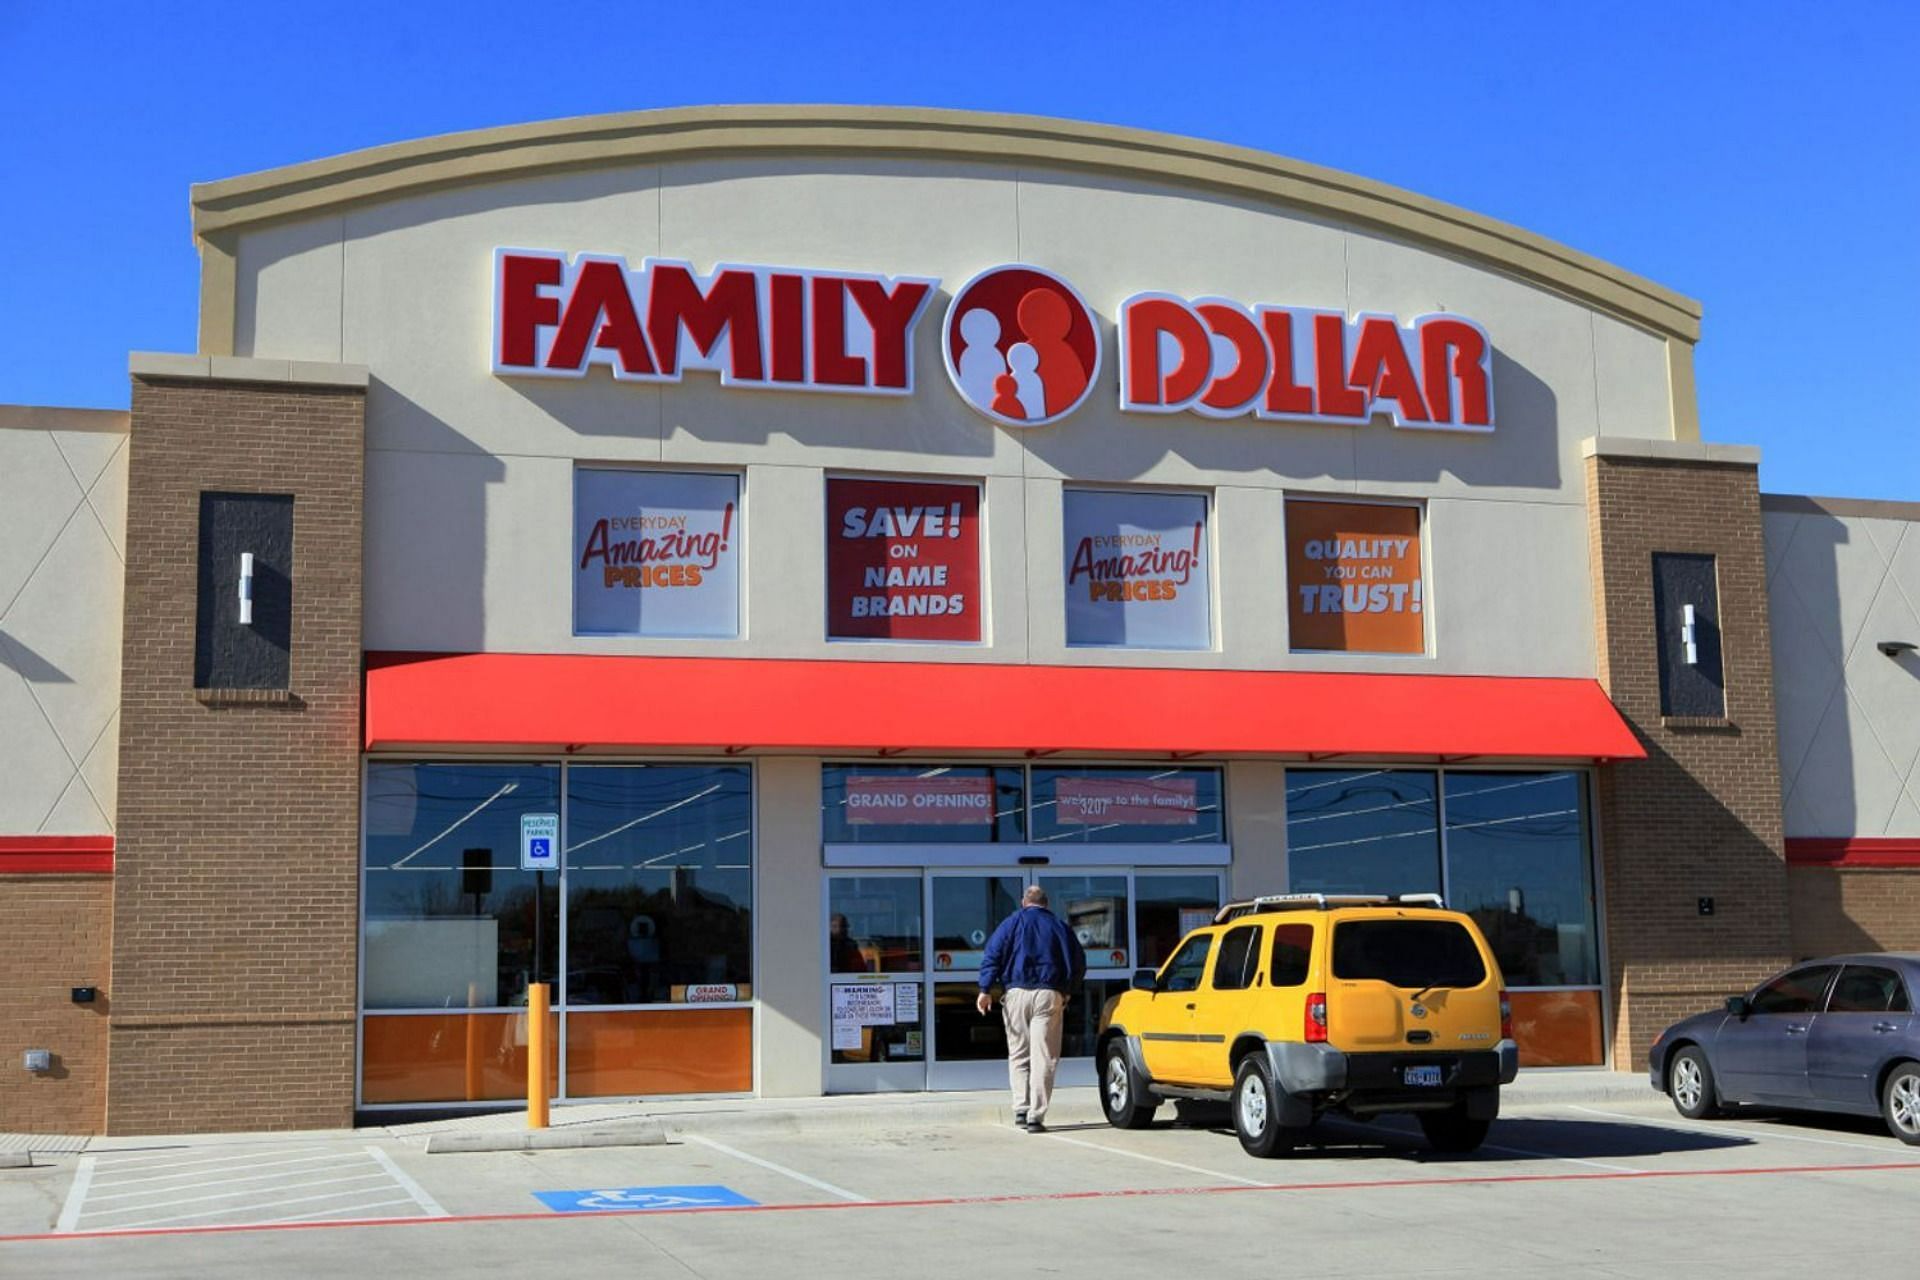 Family Dollar recalls products after rodent infestation (Image via Getty Images)